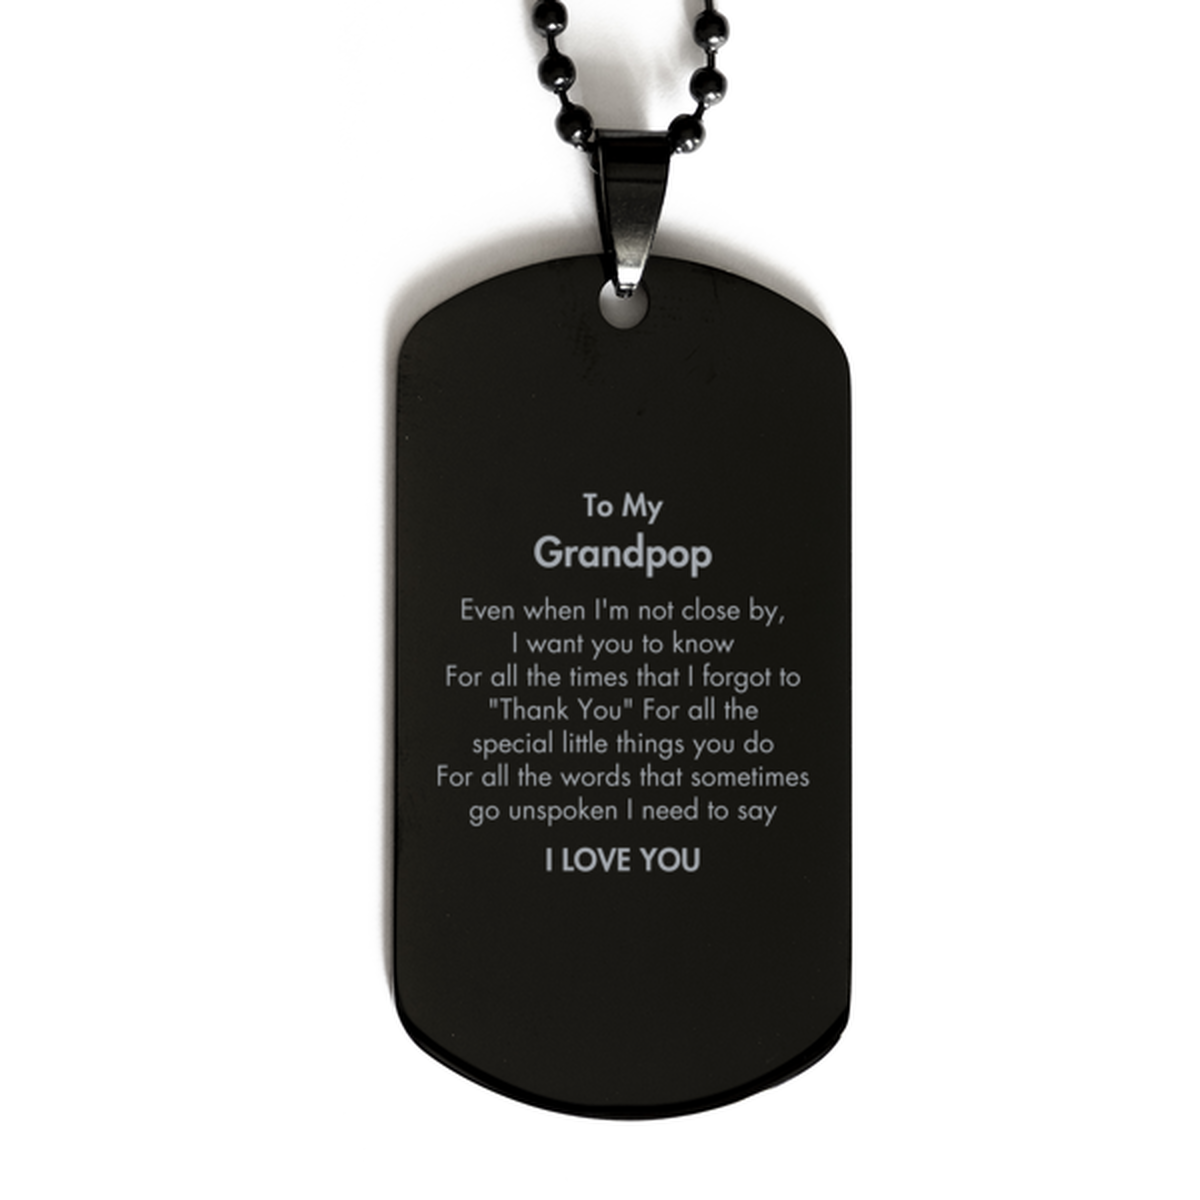 Thank You Gifts for Grandpop, Keepsake Black Dog Tag Gifts for Grandpop Birthday Mother's day Father's Day Grandpop For all the words That sometimes go unspoken I need to say I LOVE YOU